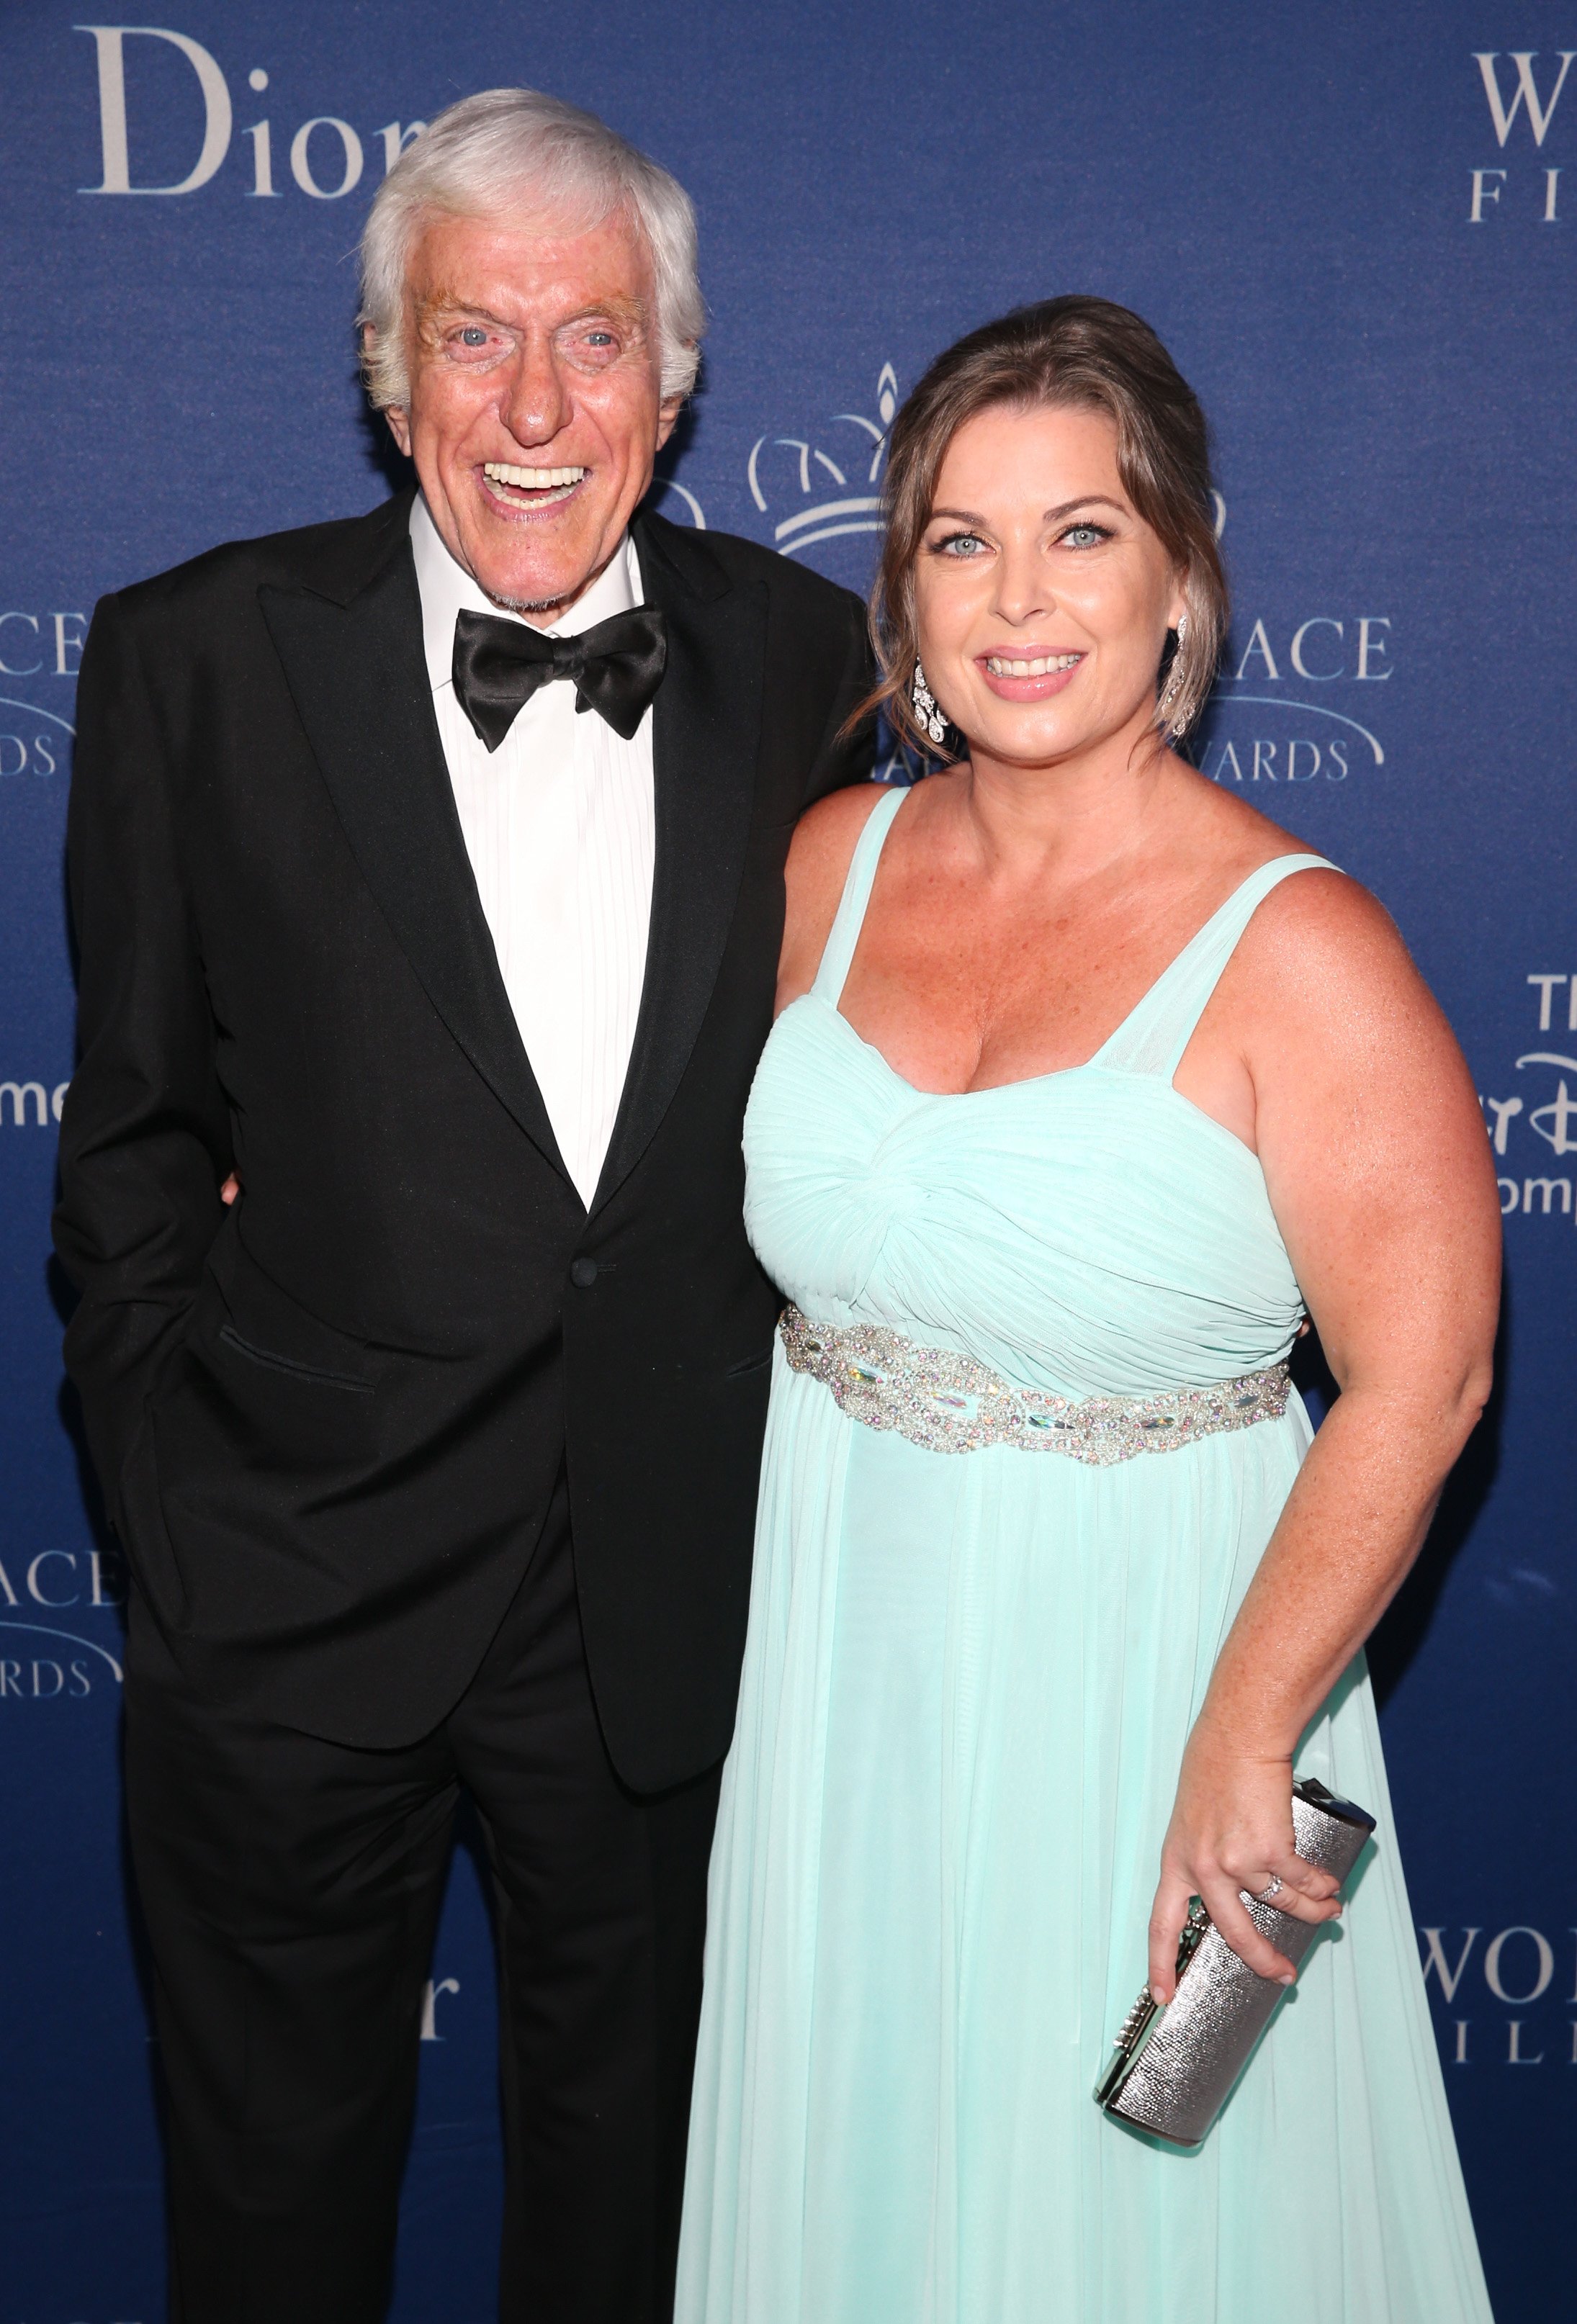 Dick Van Dyke and his wife Arlene Silver attend the Princess Grace Awards Gala in Beverly Hills, California on October 8, 2014 | Photo: Getty Images